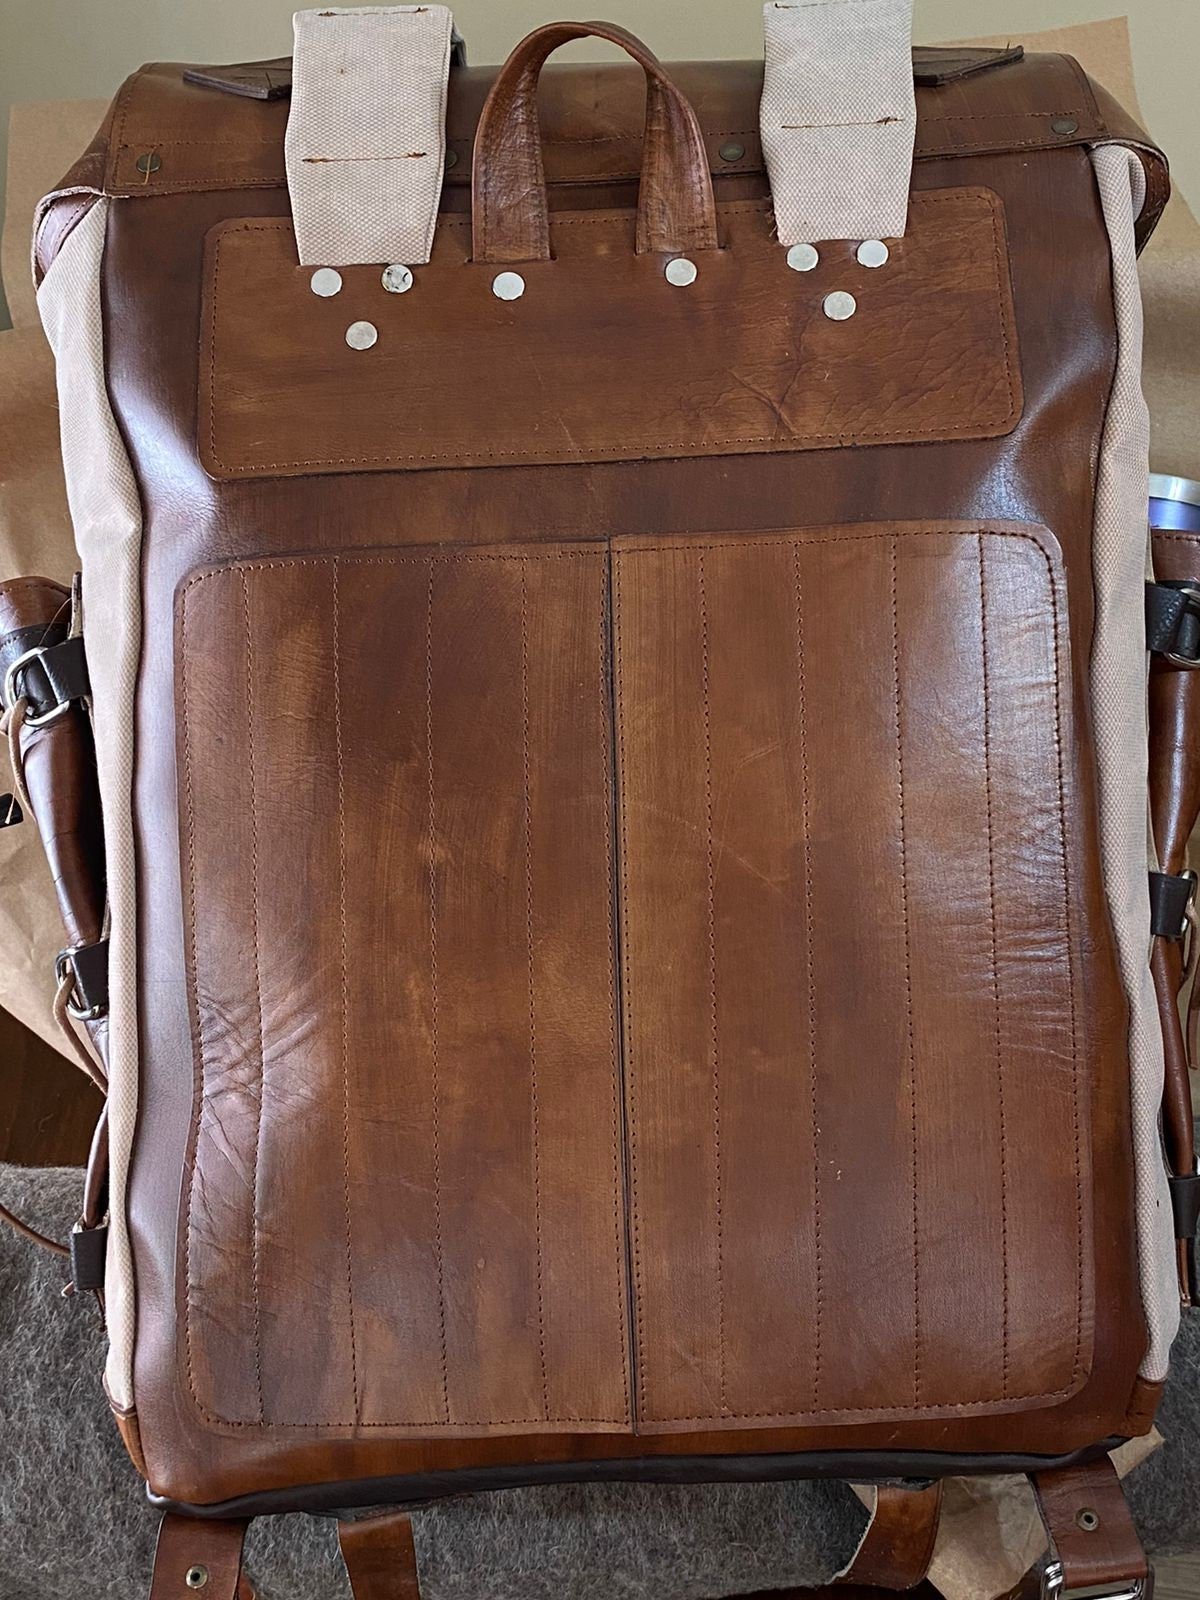 Camping Backpack | Camping Backpacks | Leather and Waxed Canvas | Camping Design Awards | Handmade Leather and Waxed Backpack for Travel, Camping, Hunting, Hiking | 45 Liter | Personalization bushcraft - camping - hiking backpack 99percenthandmade   